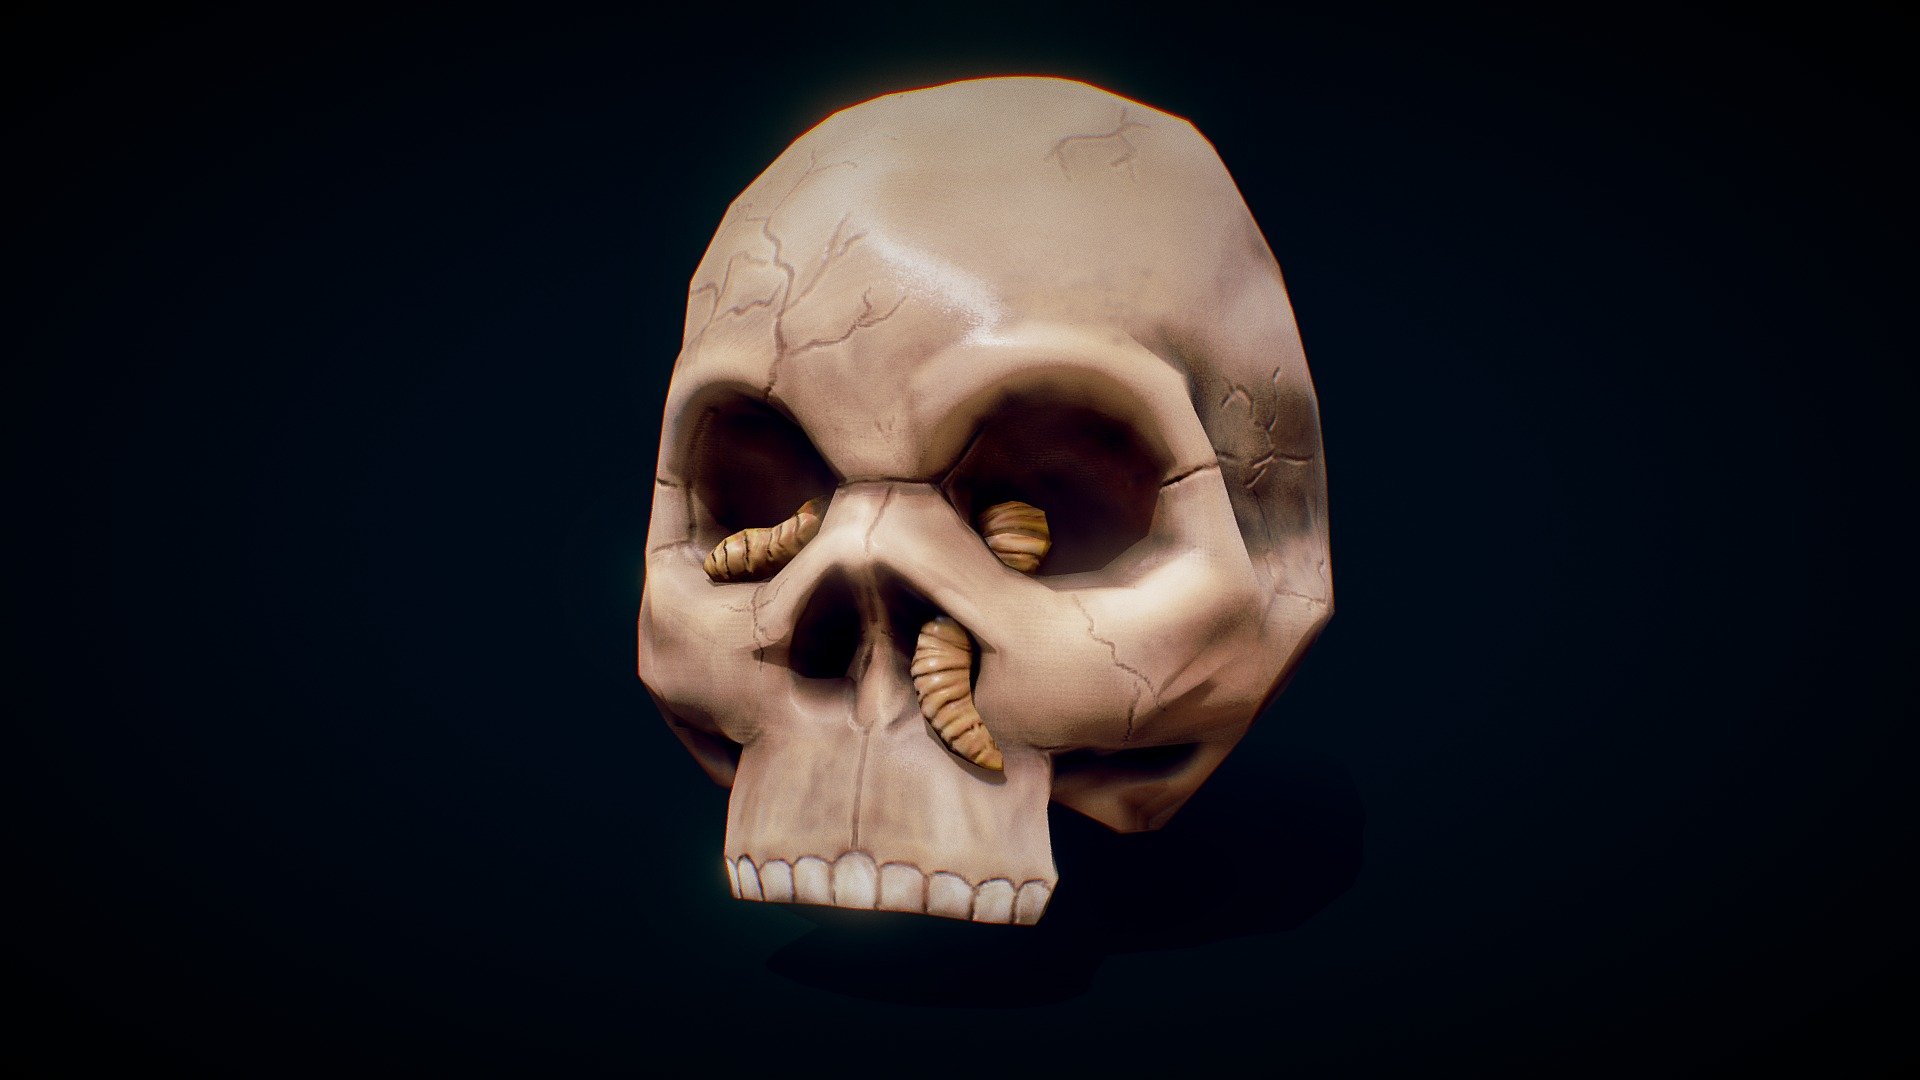 Skull with a worm